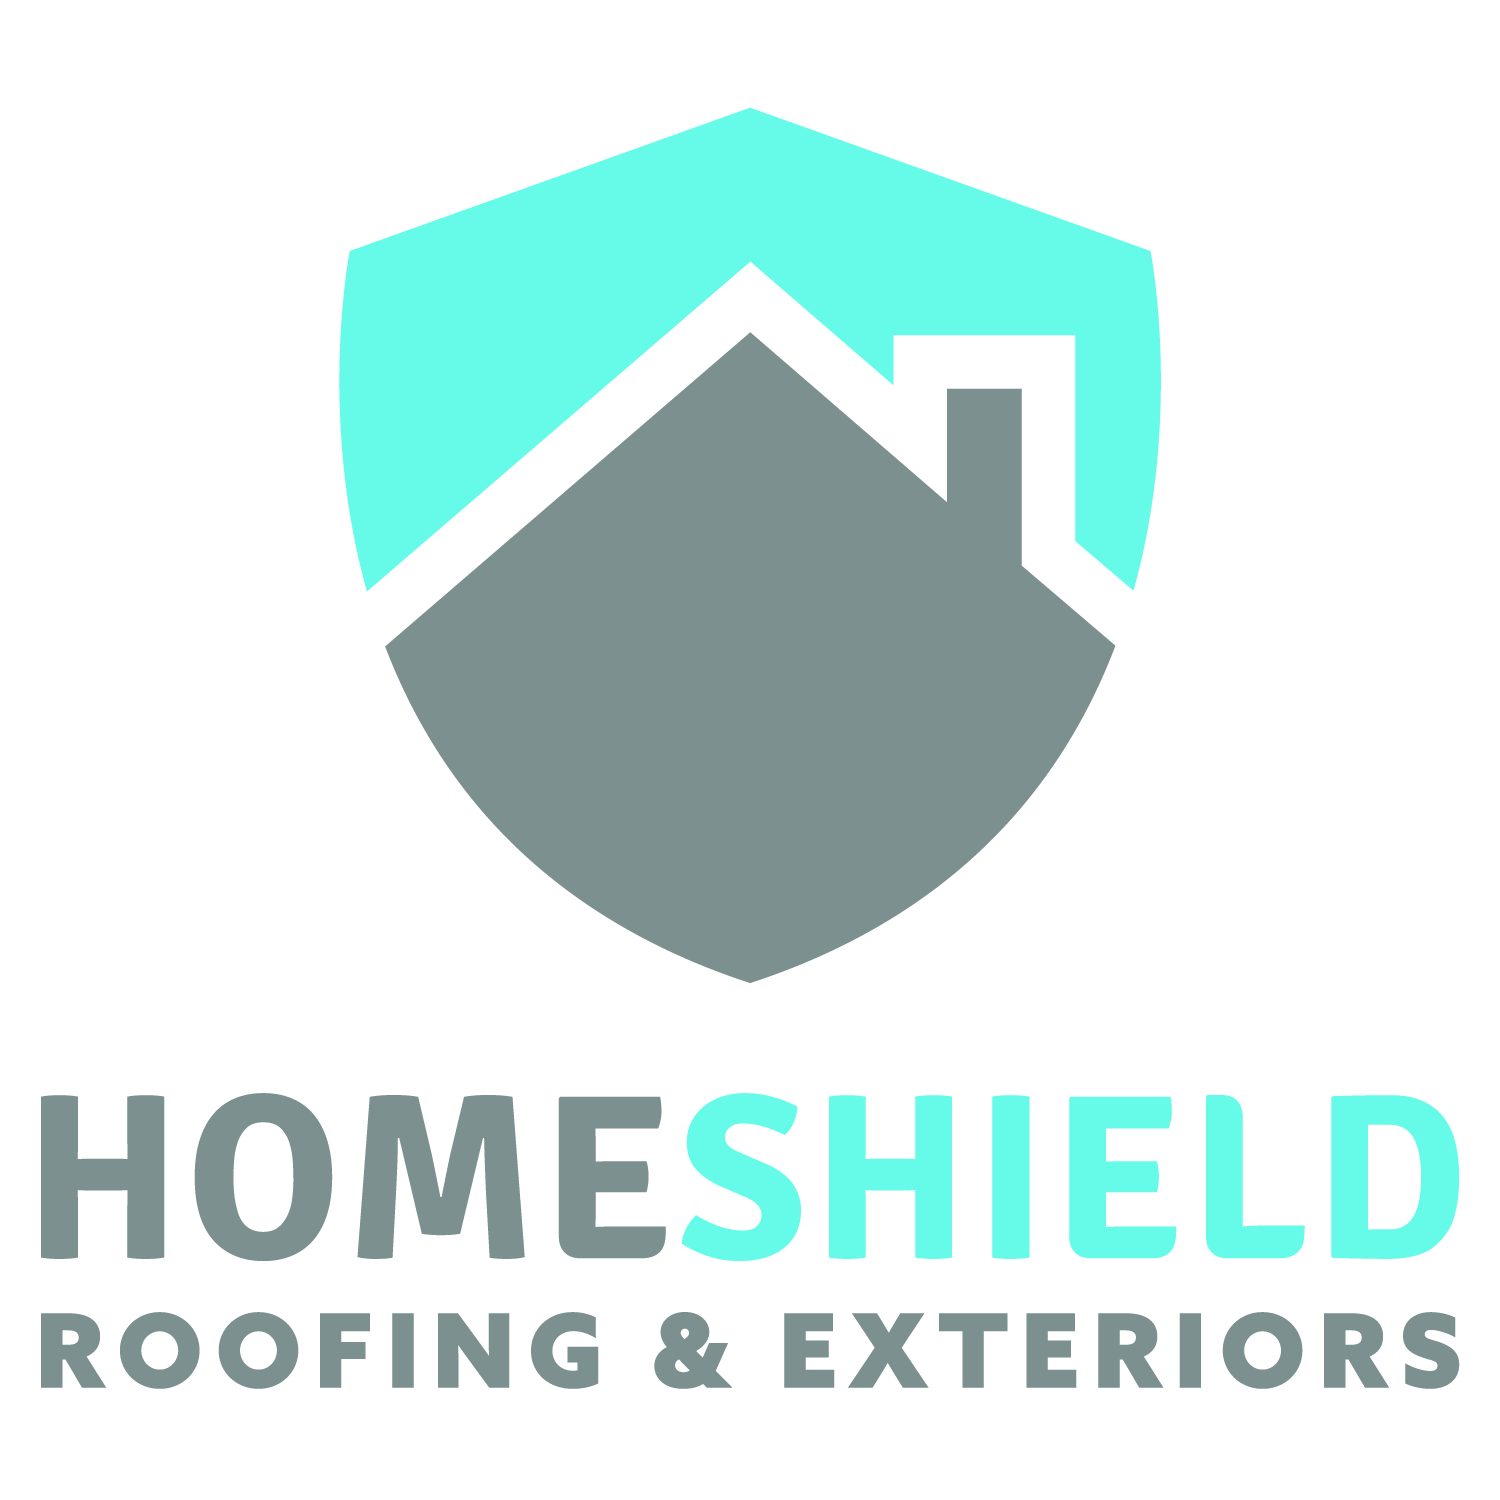 Homeshield Roofing and Exteriors